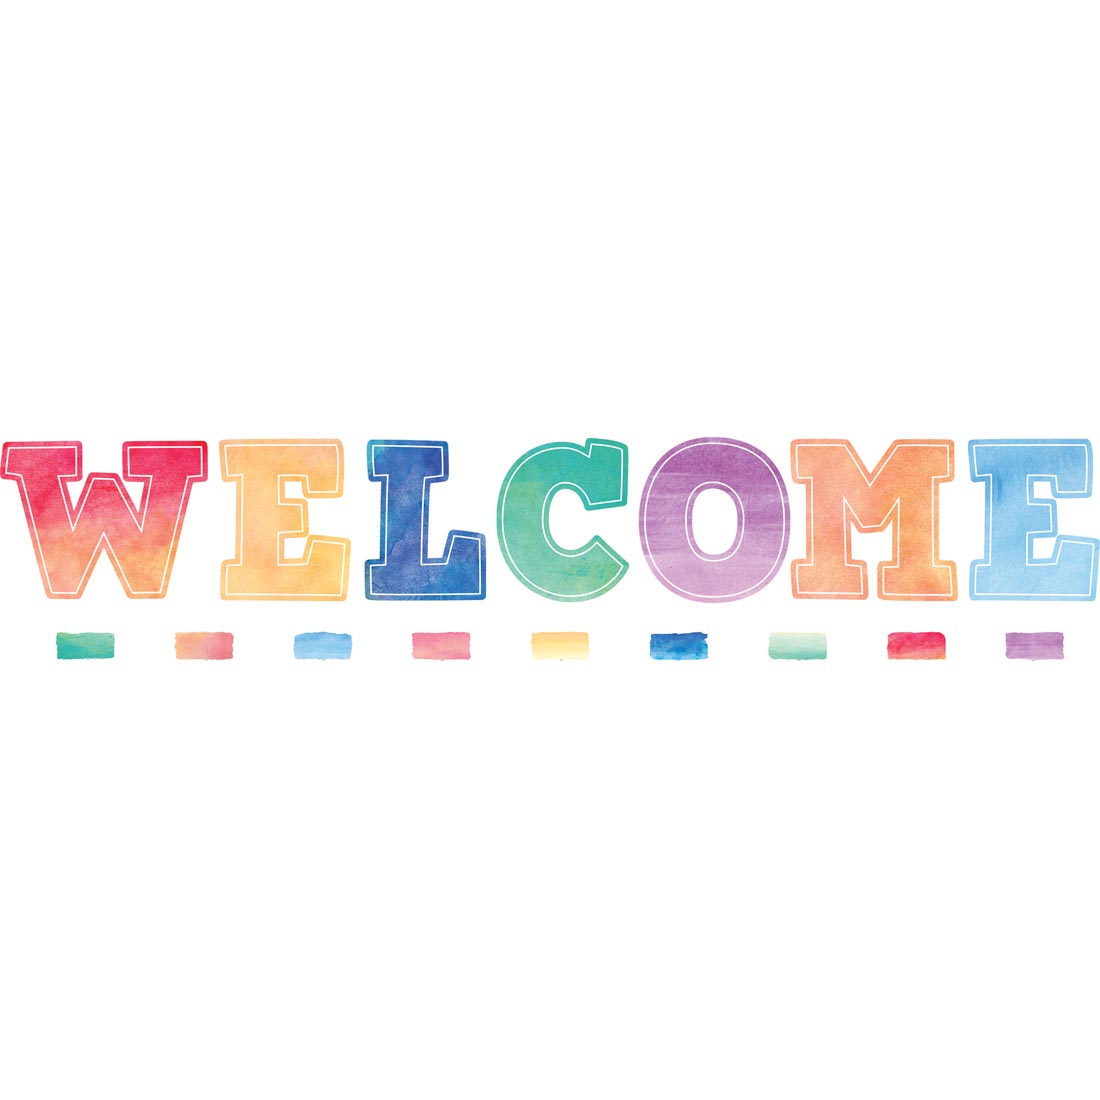 Welcome Bulletin Board Display Set from the Watercolor collection by Teacher Created Resources